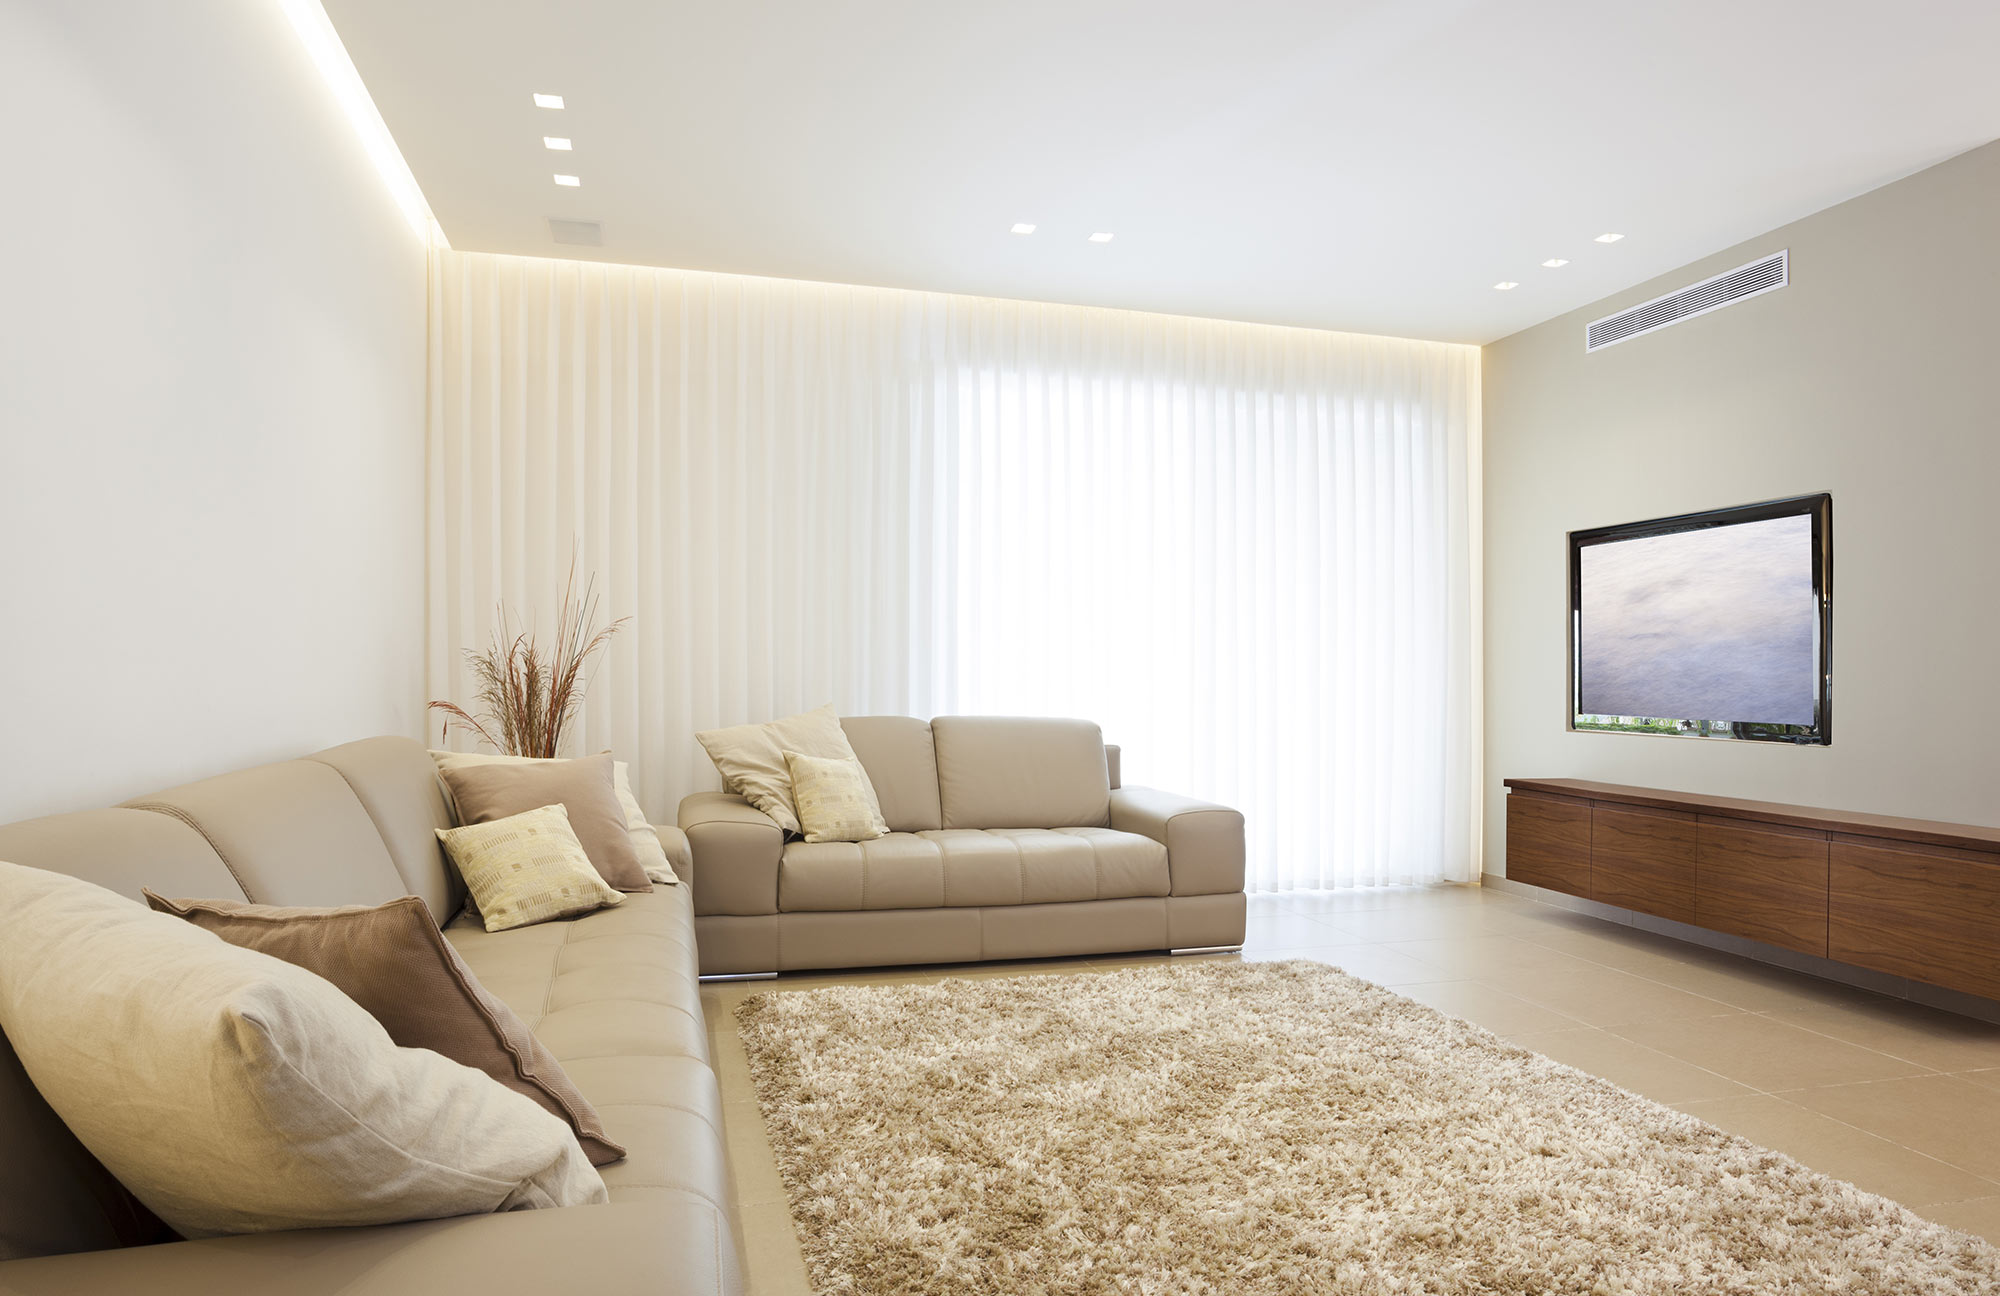 Stylish lounge room interior with ducted reverse cycle air conditioning offered by glow in adelaide